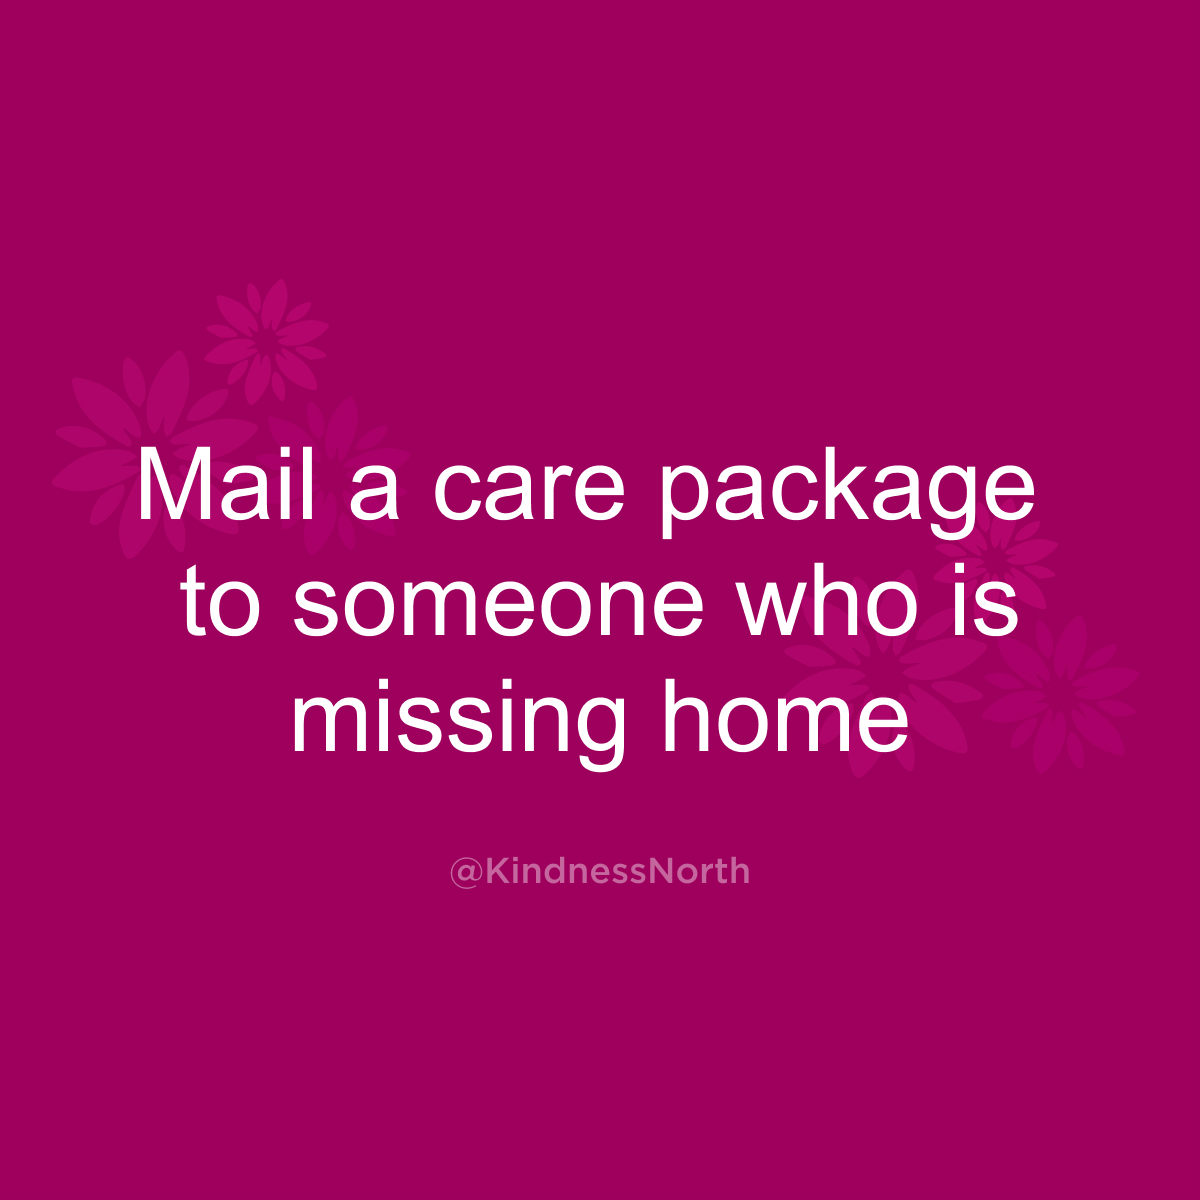 Mail a care package to someone who is missing home